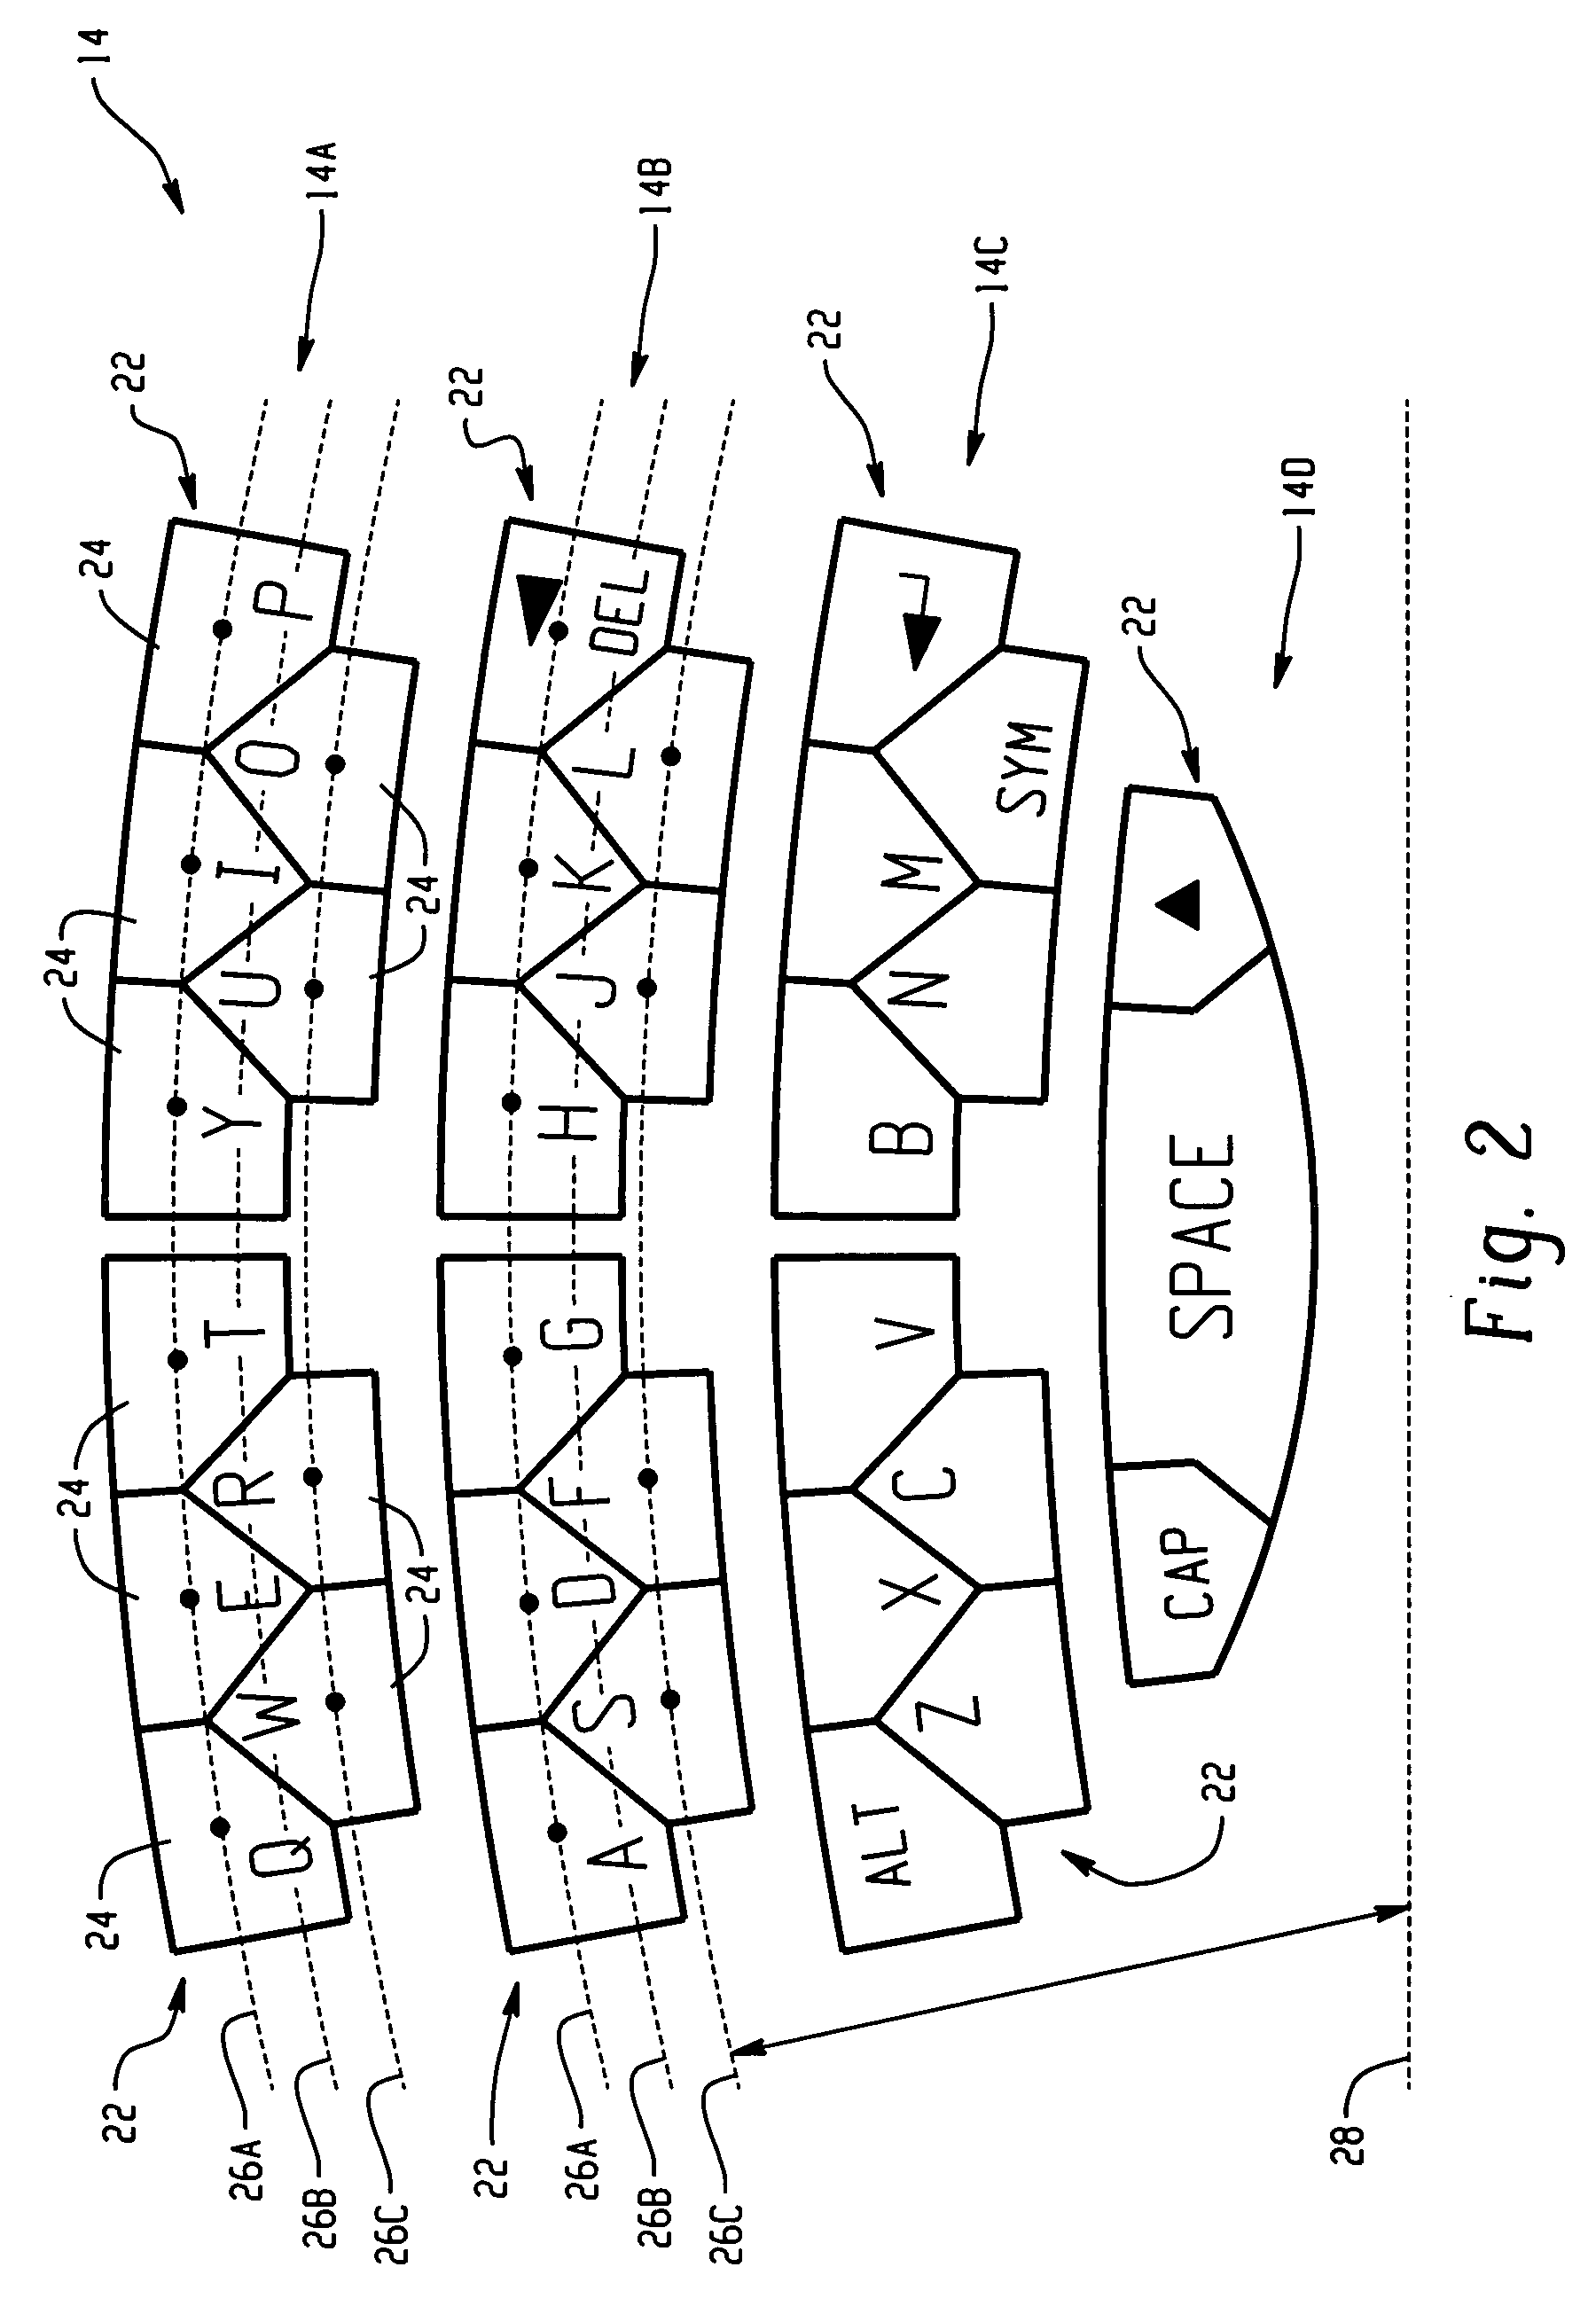 Staggered keyboard for a portable device